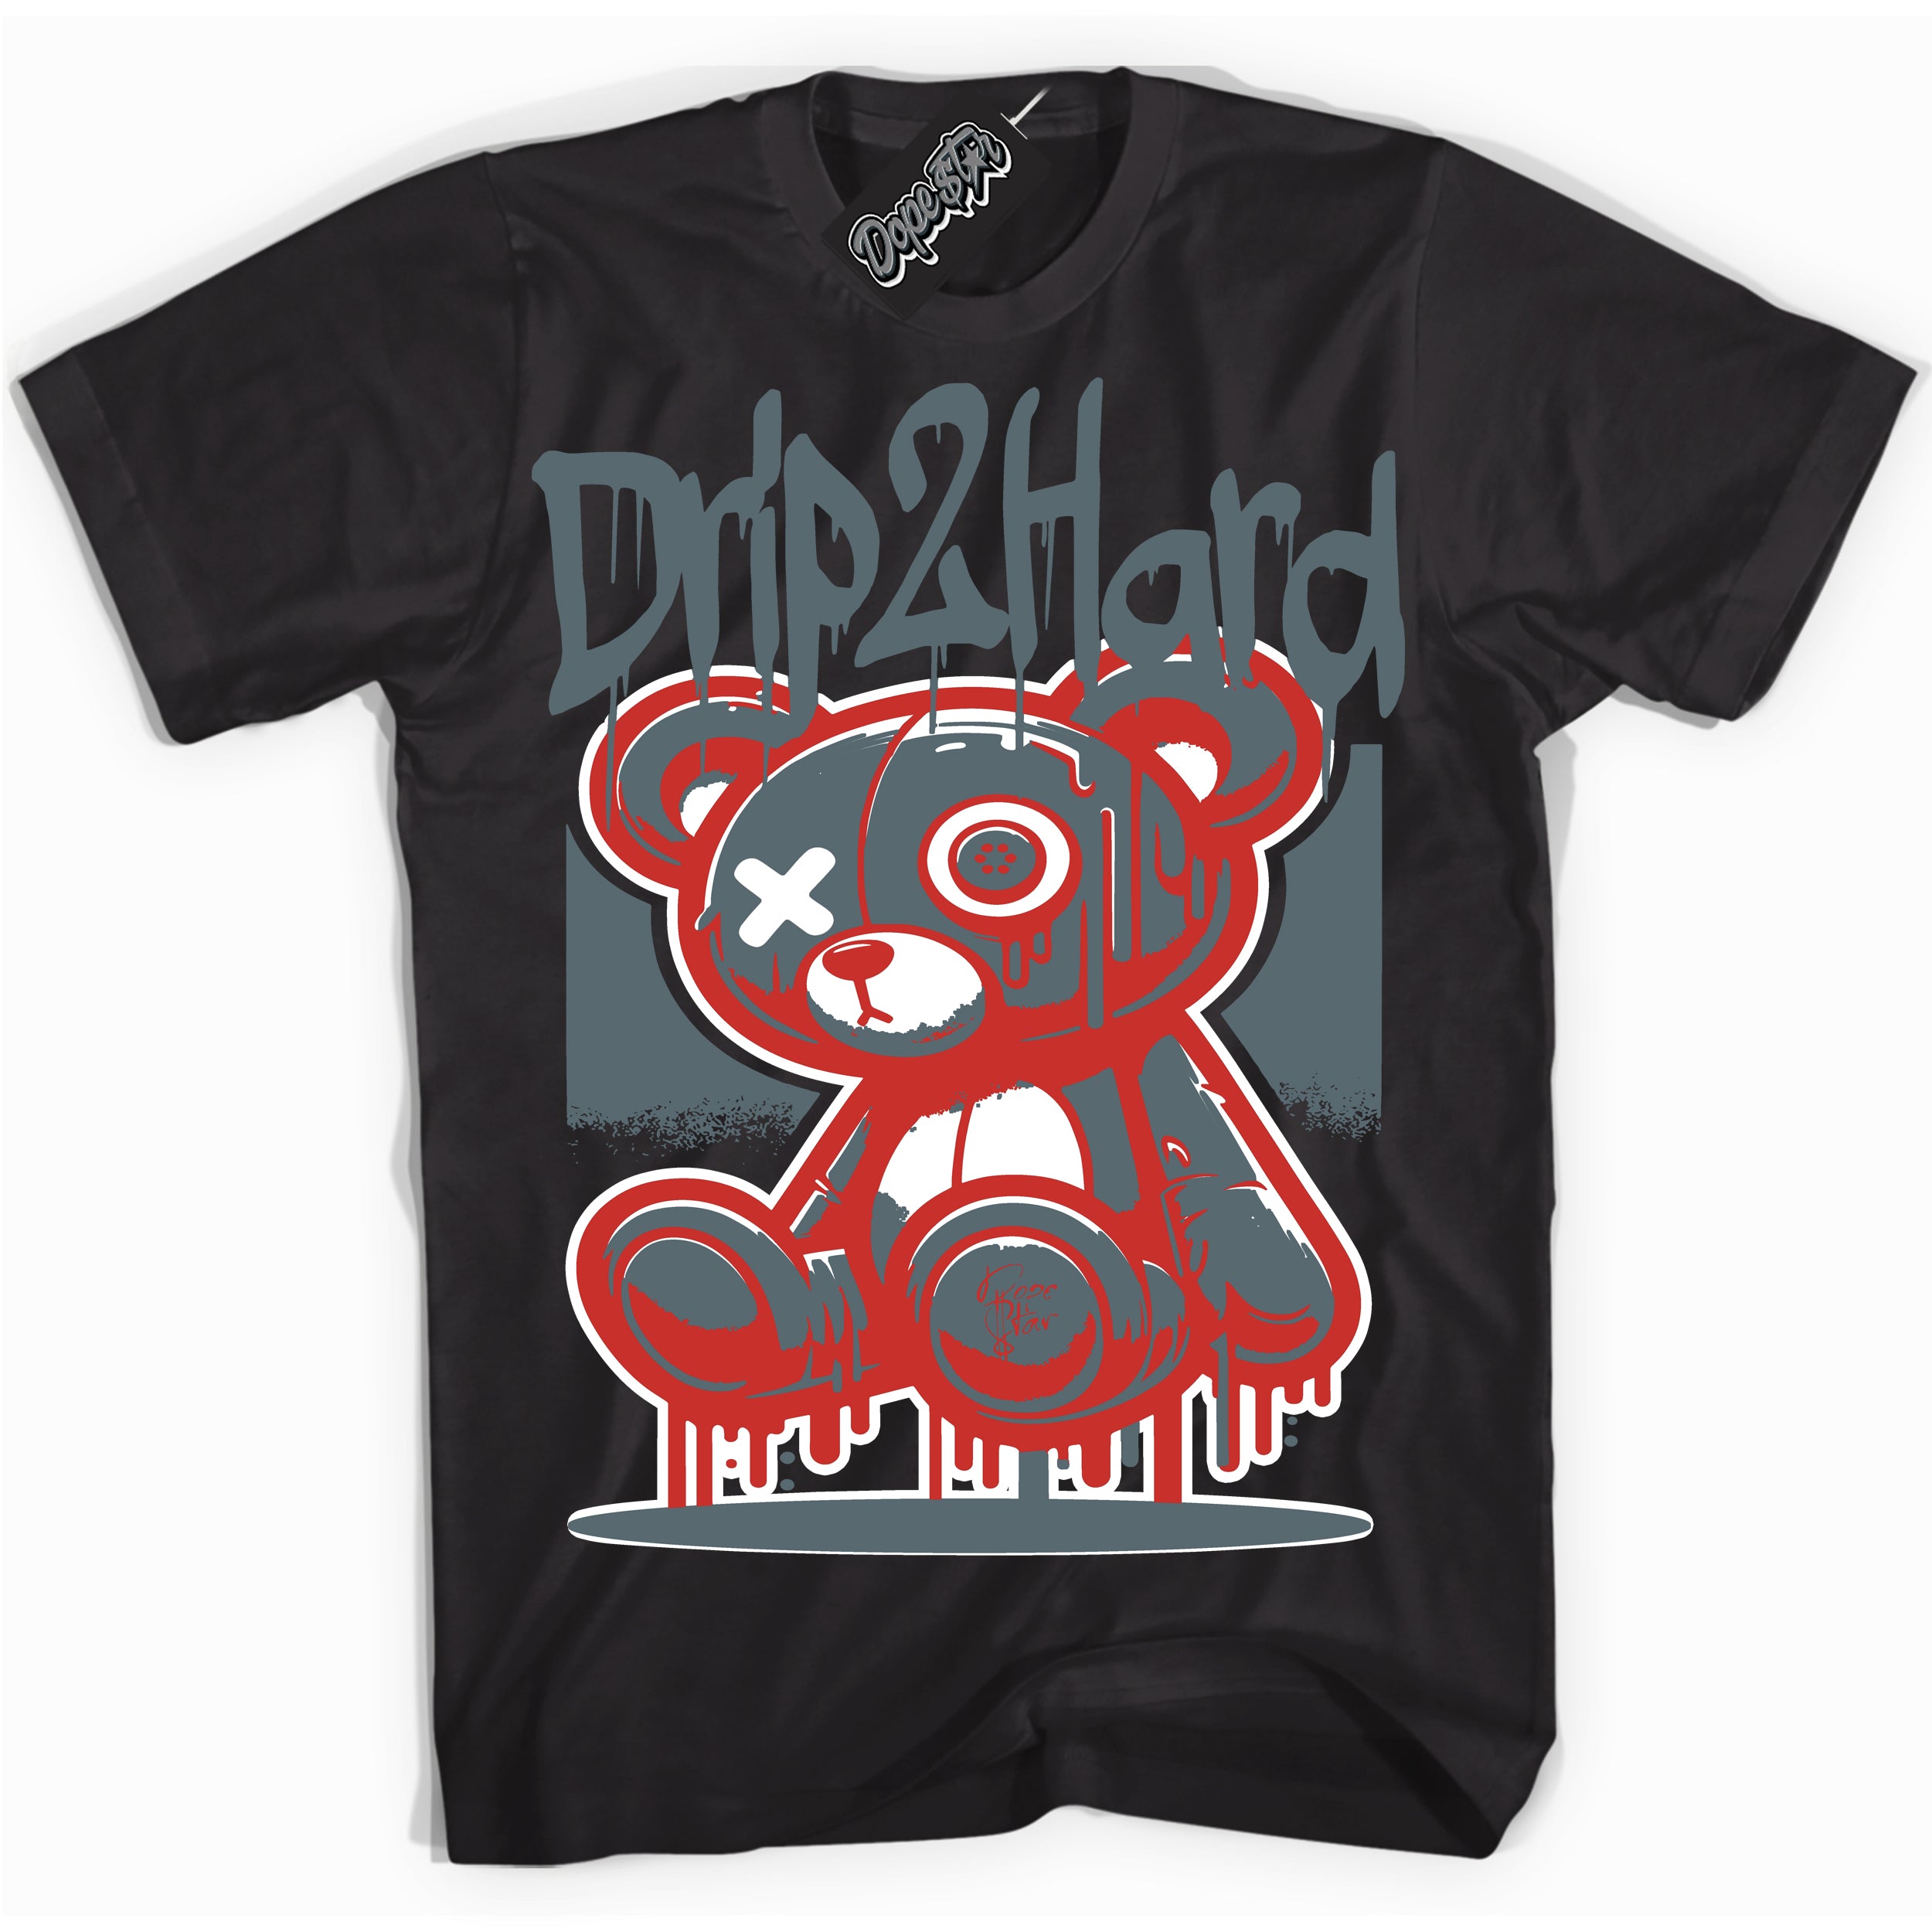 Cool Black graphic tee with “ Drip 2 Hard ” design, that perfectly matches Red Fire 9s